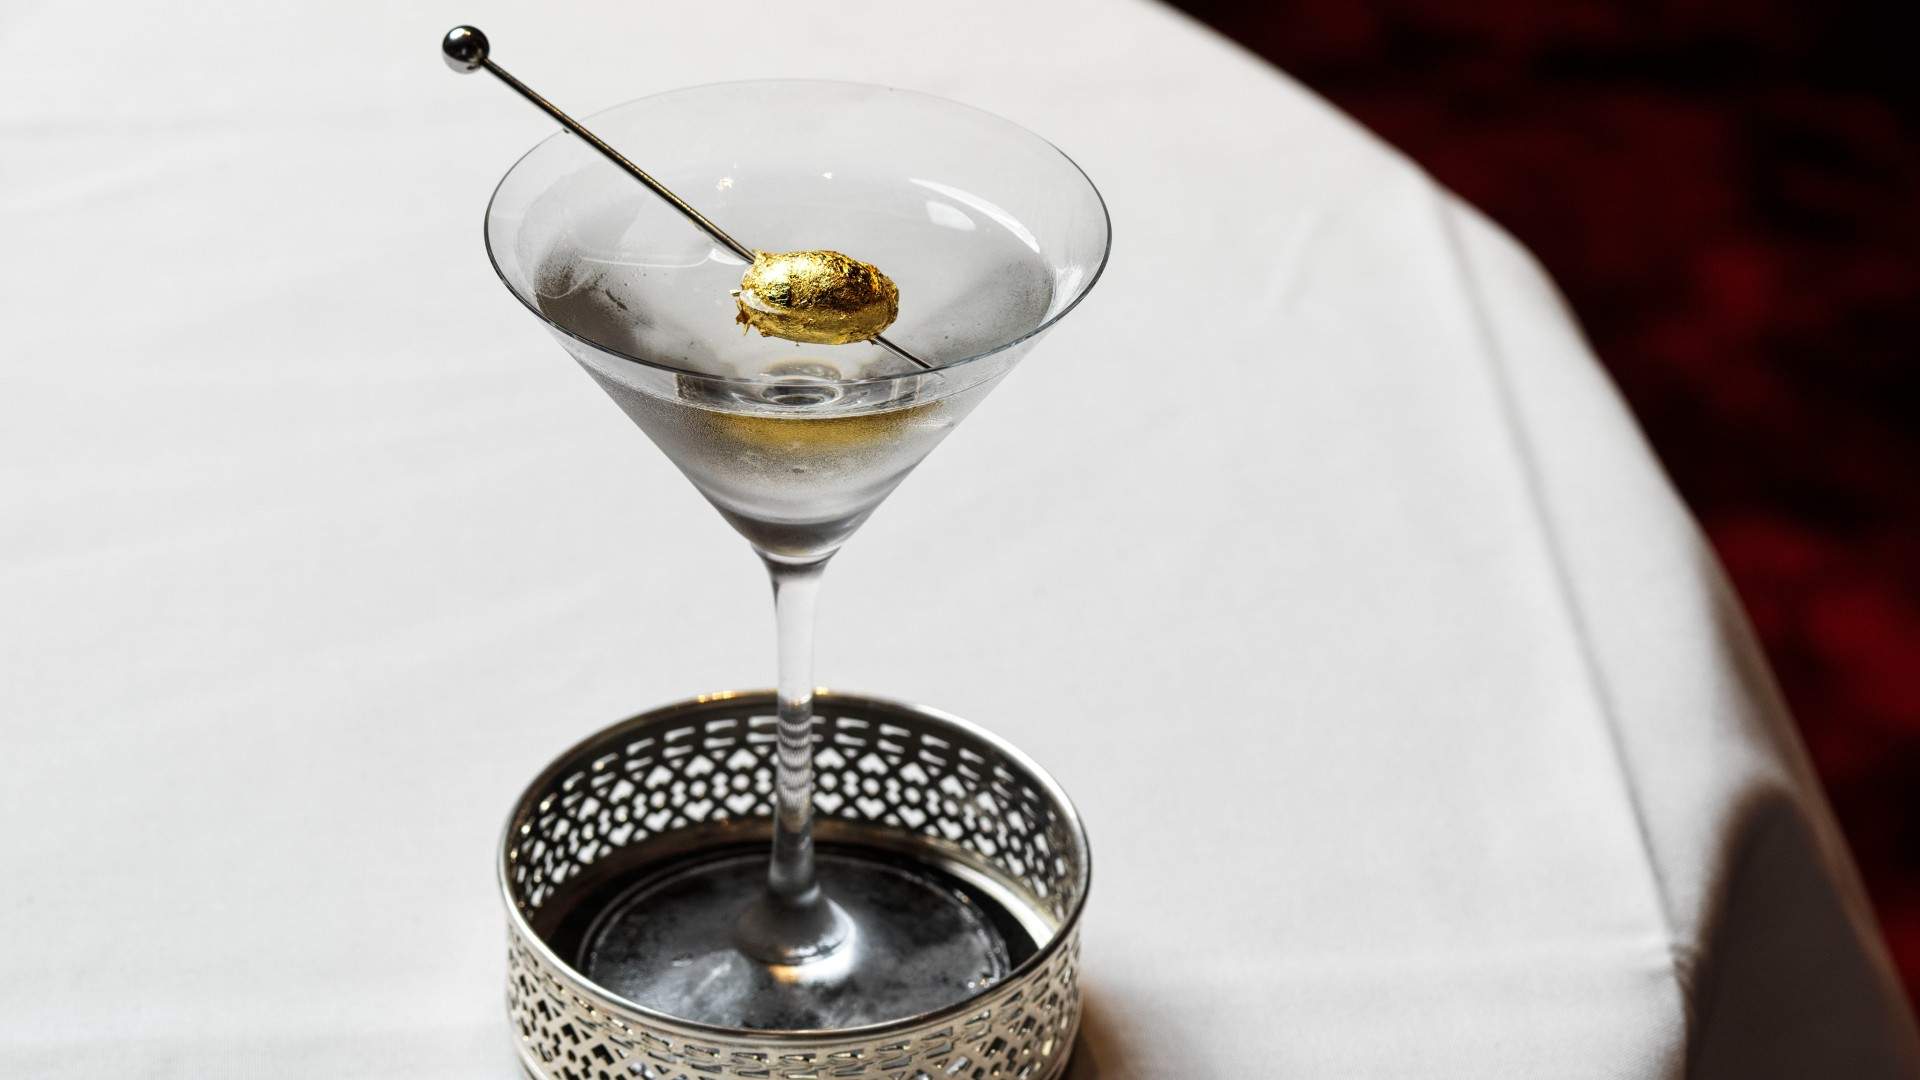 Now Open: Maurice Terzini's Decadent New Bar in Sydney's InterContinental Hotel